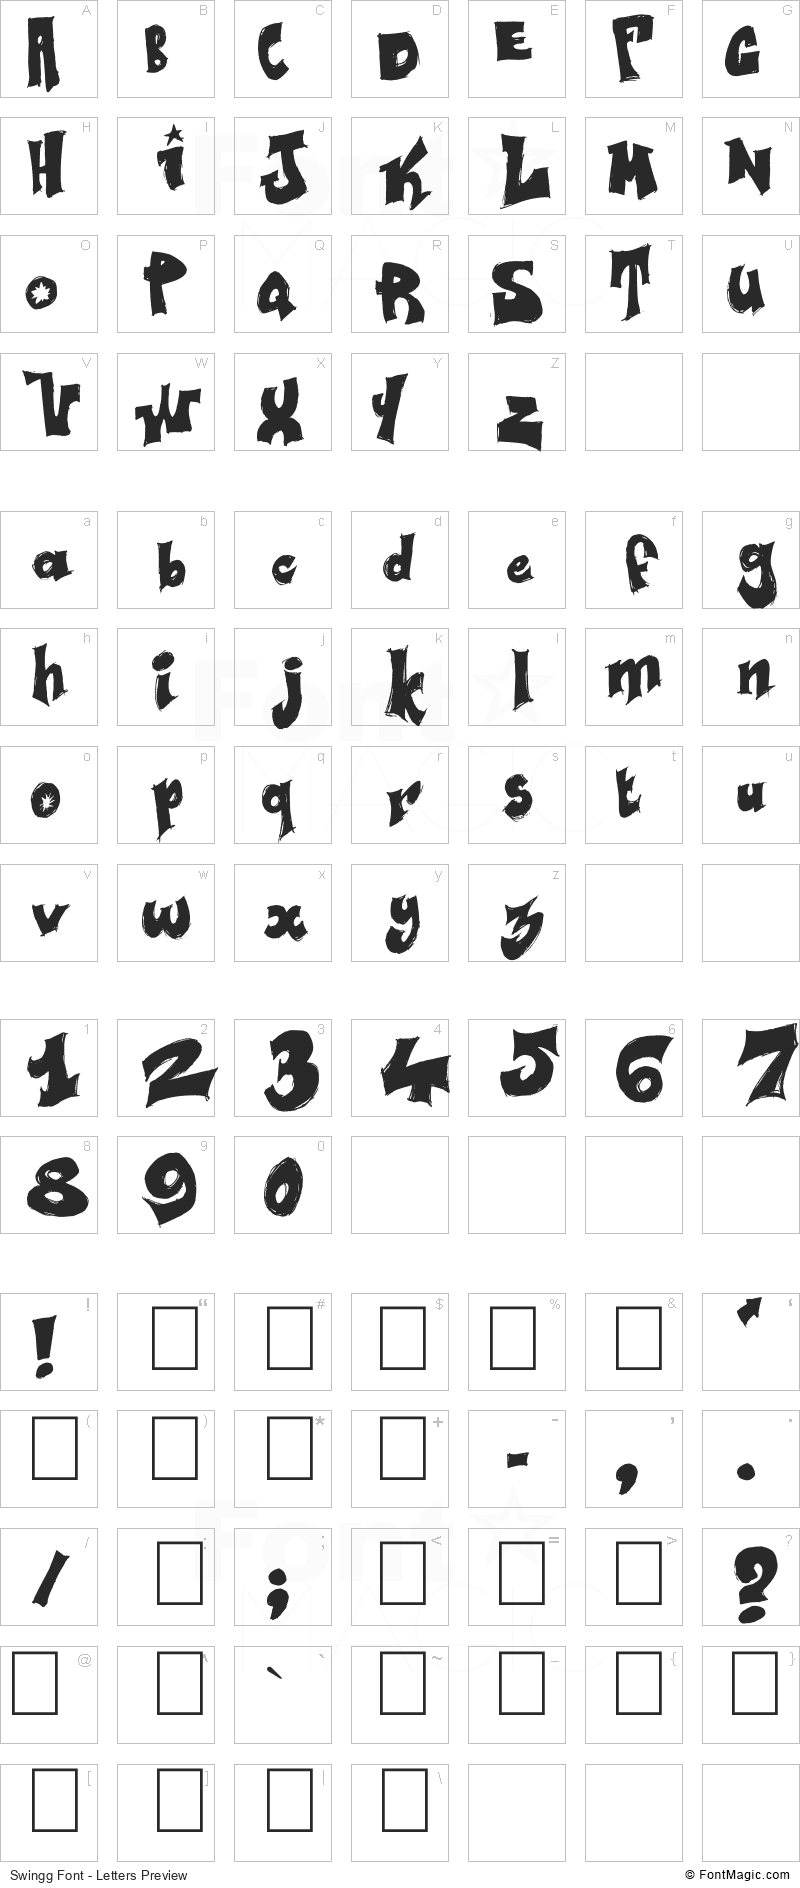 Swingg Font - All Latters Preview Chart